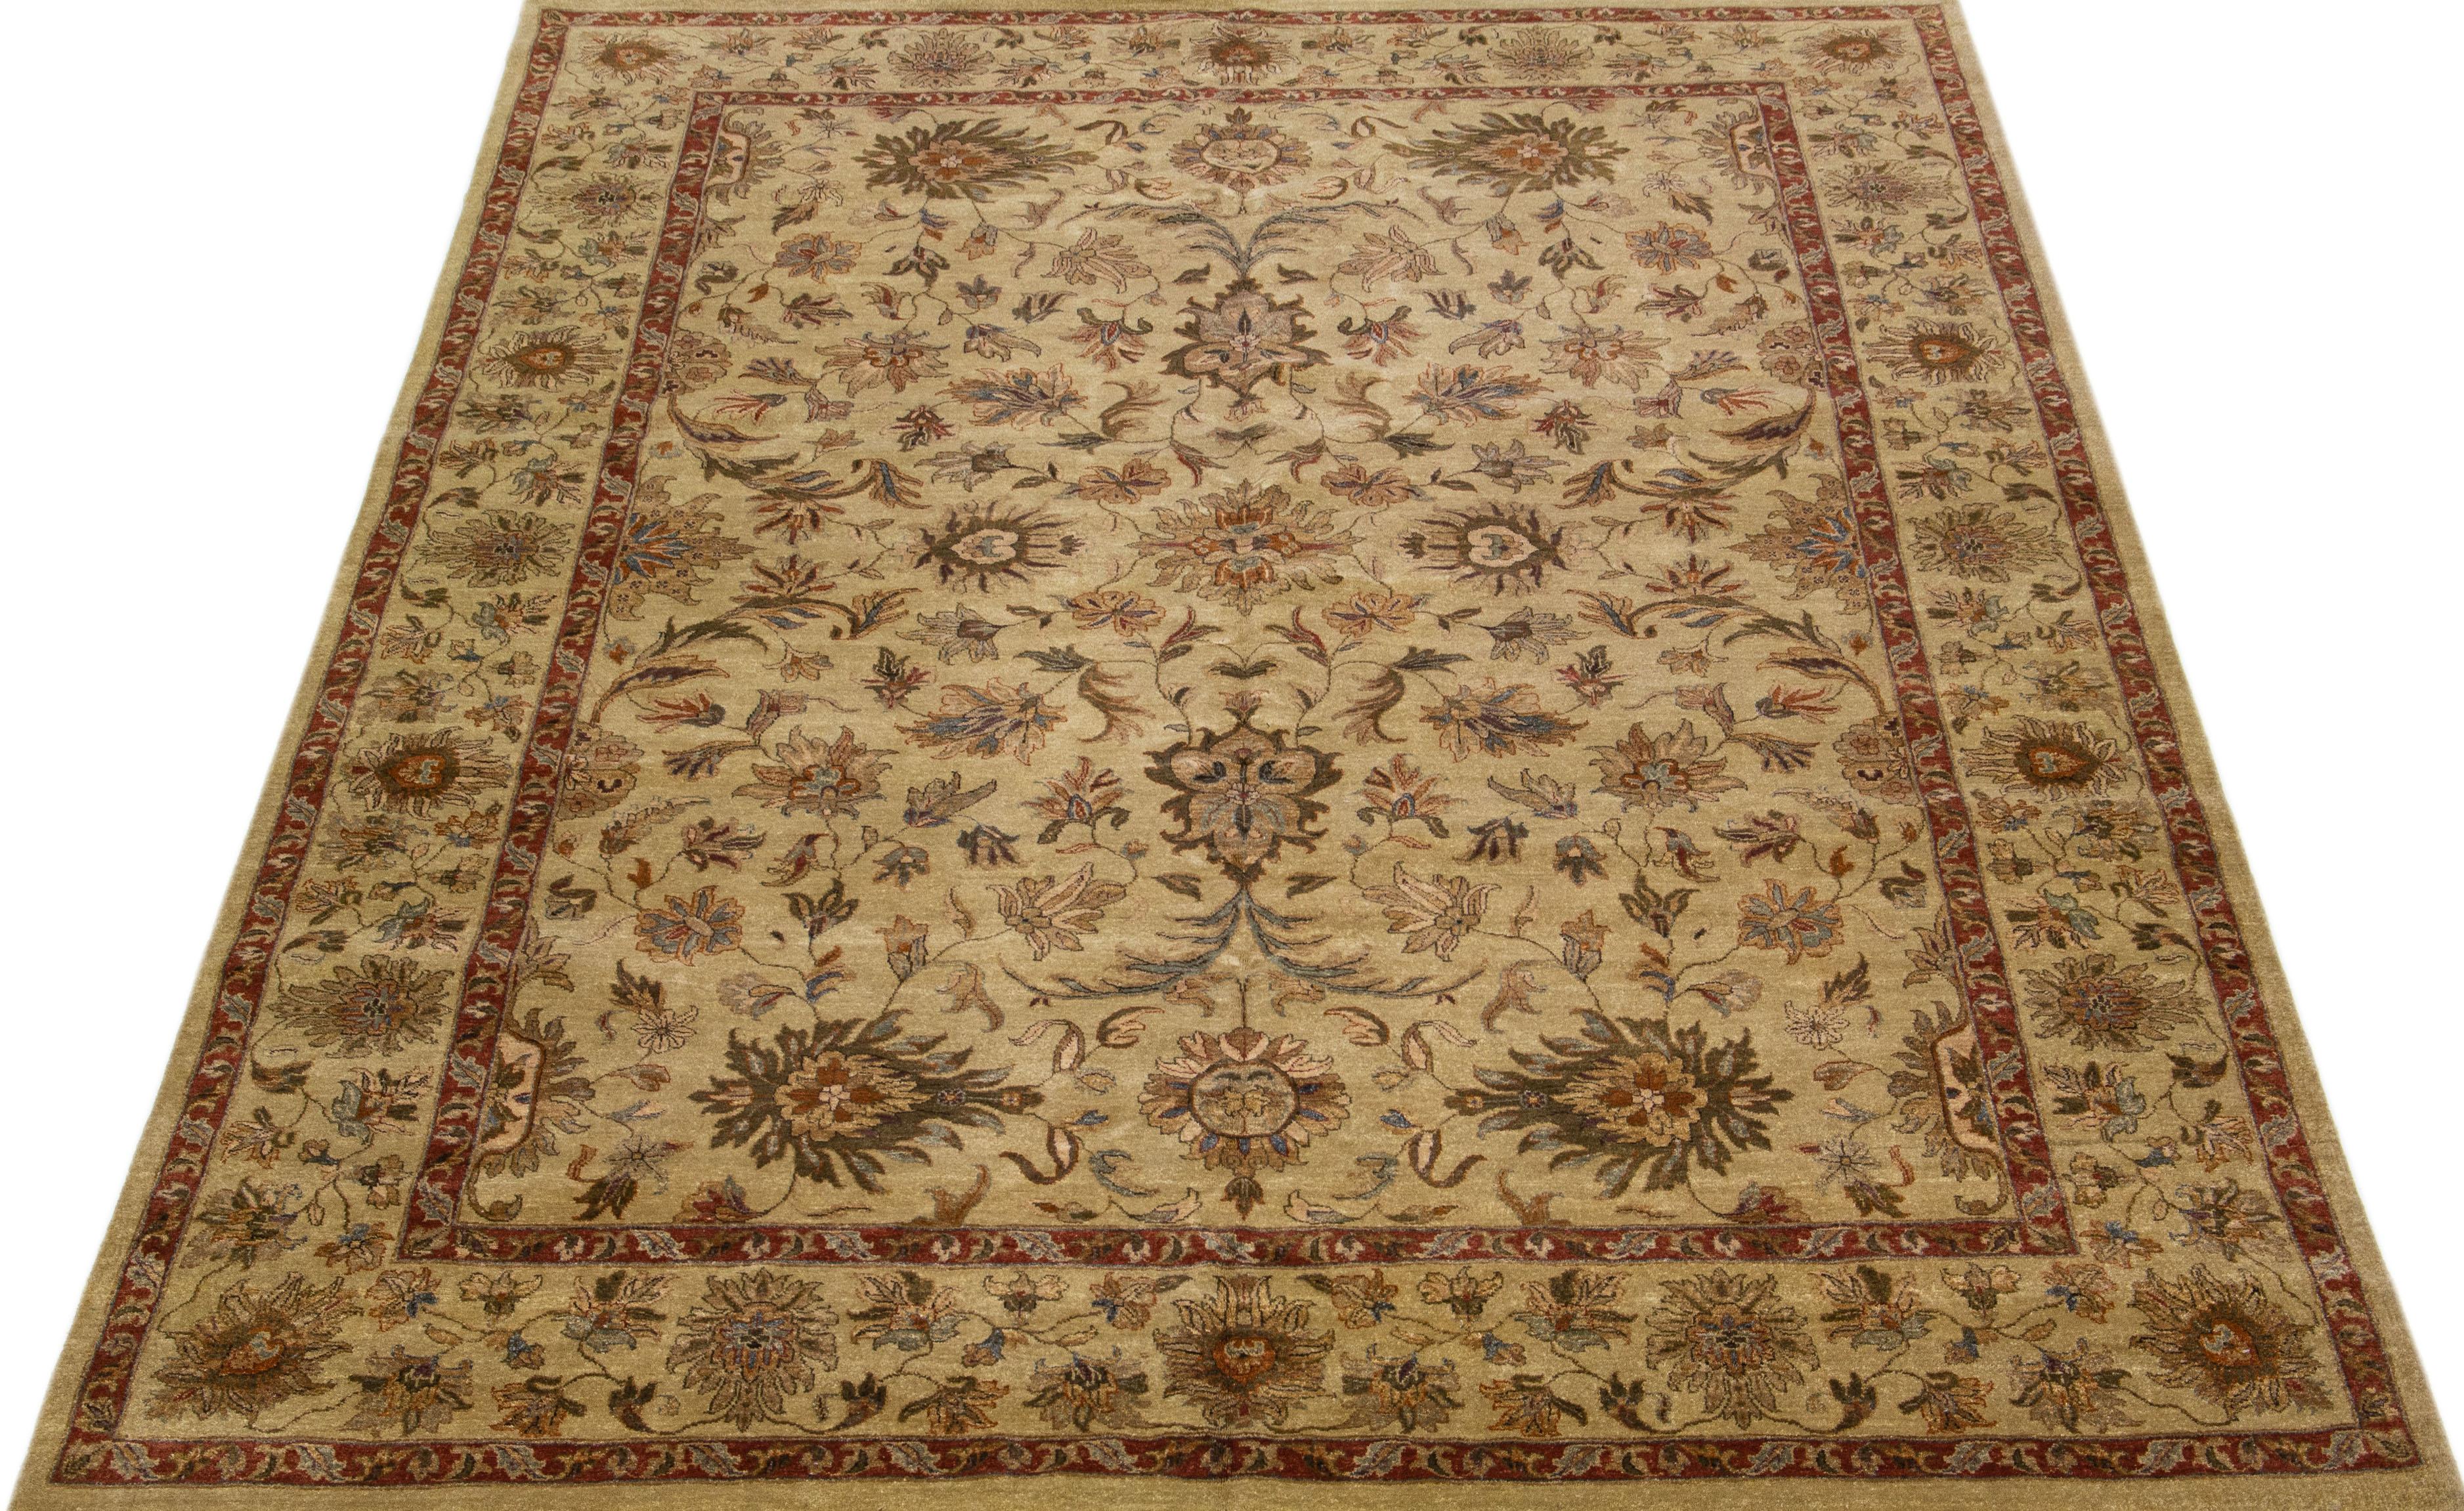 Mid-Century Modern Contemporary Indian Handmade Floral Wool Rug In Tan Color For Sale